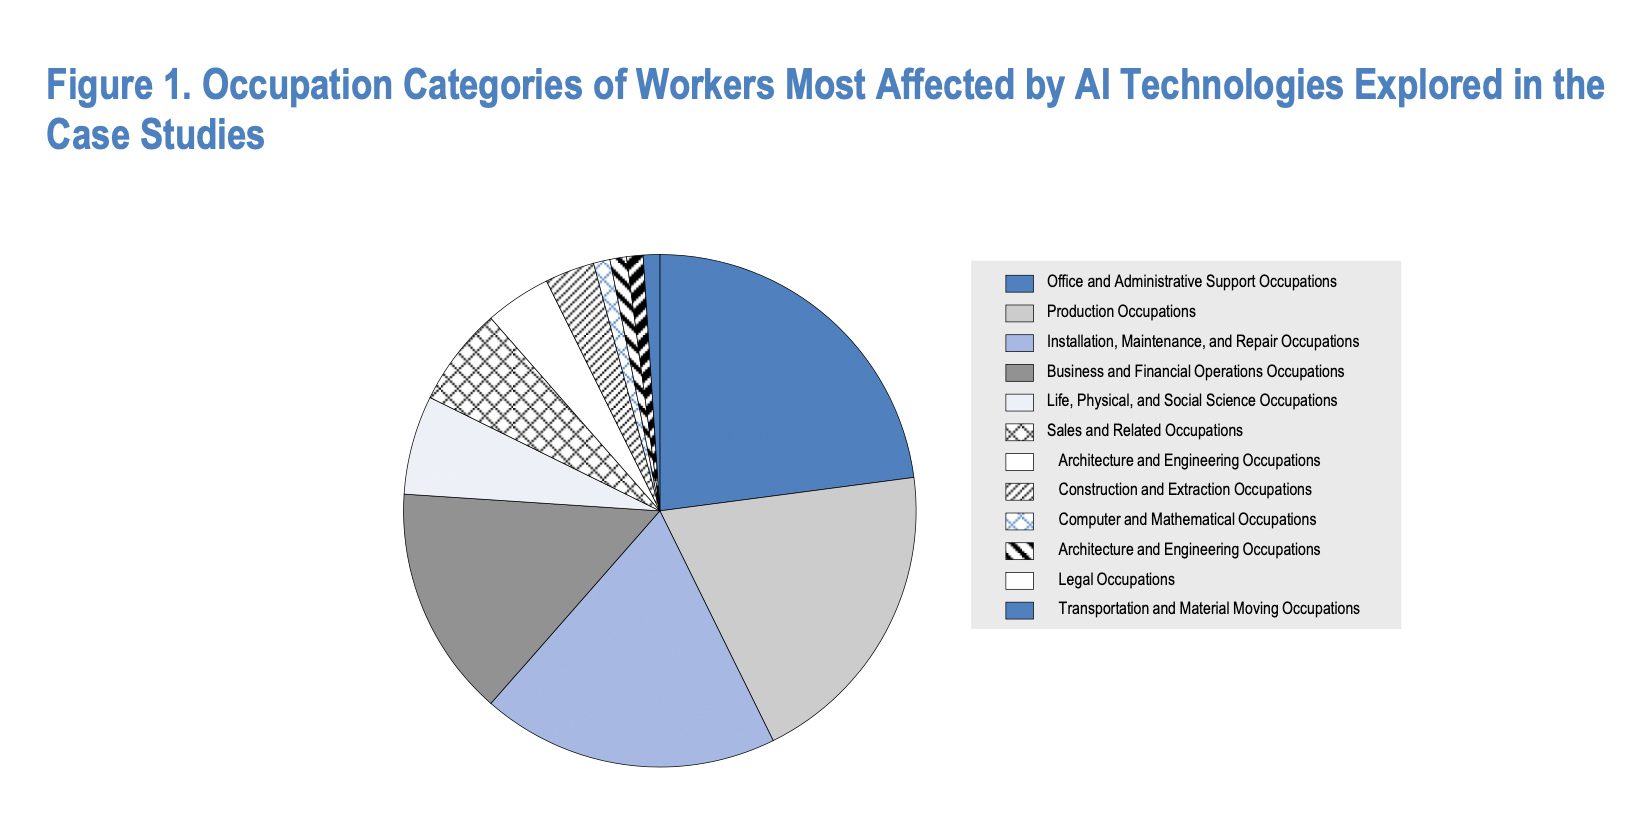 The impact of AI on the workplace: Evidence from OECD case studies of AI implementation